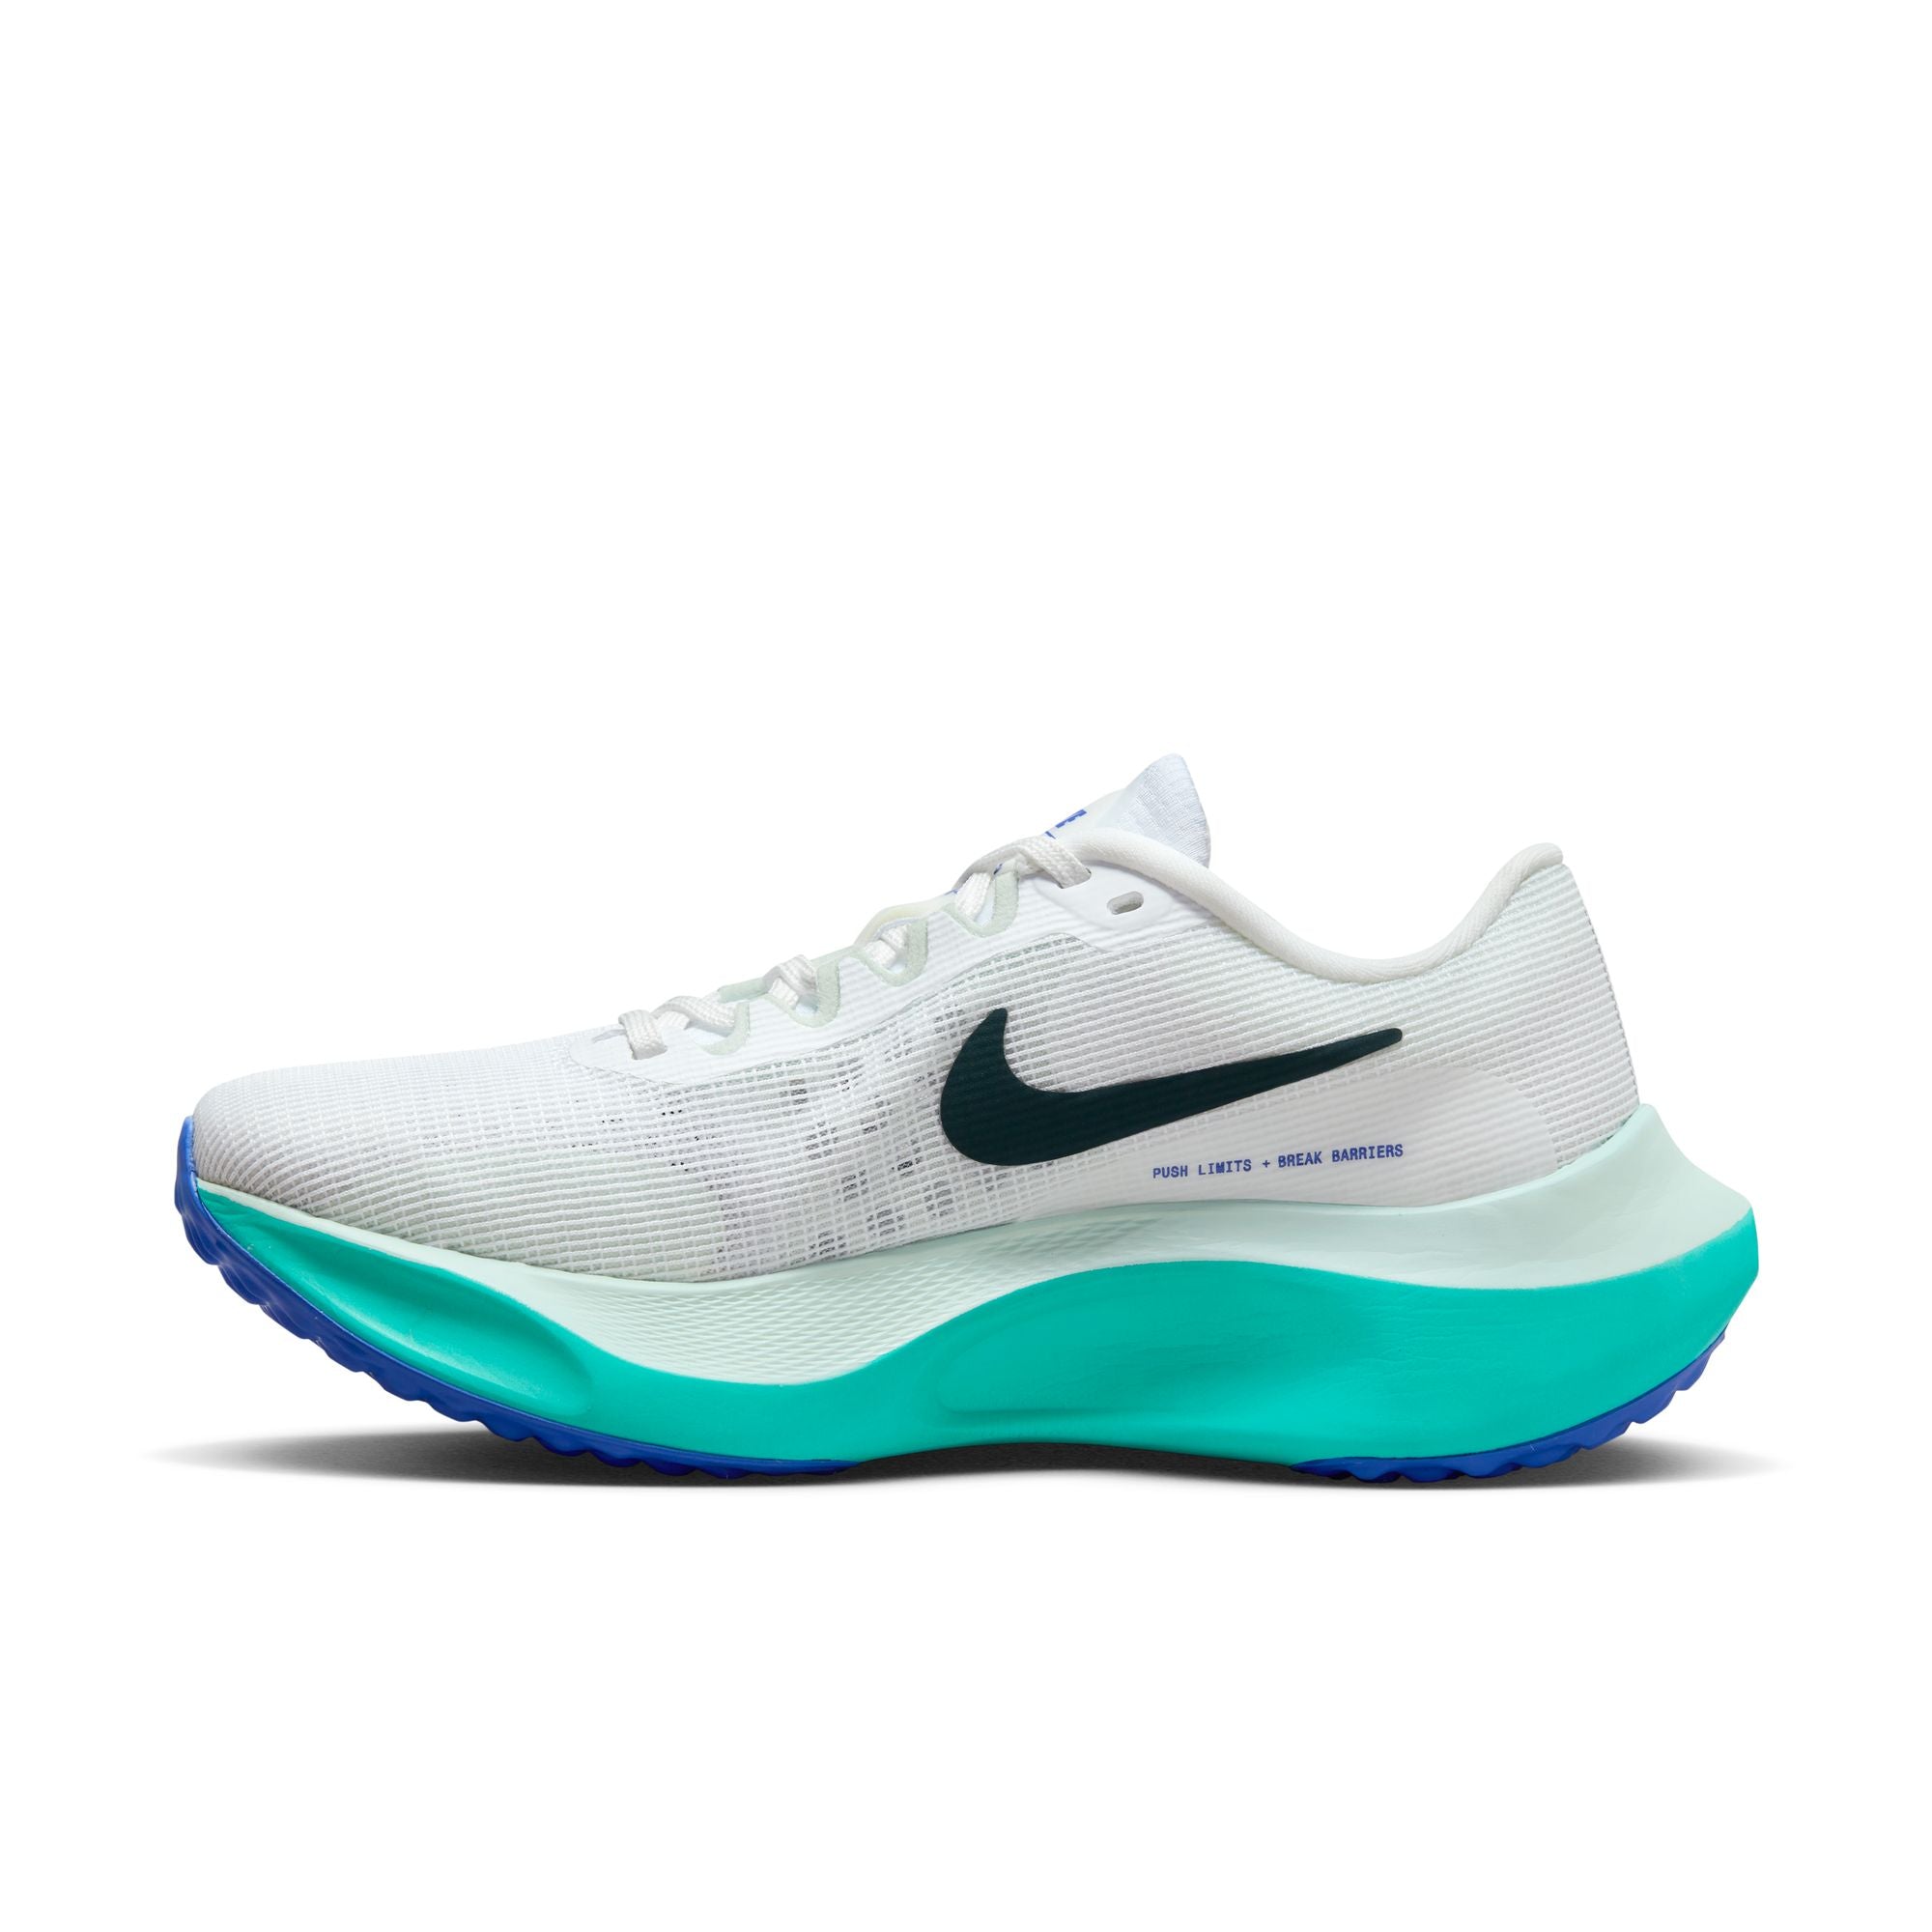 NIKE ZOOM FLY 5 DM8974-101 RUNNING SHOES (W)